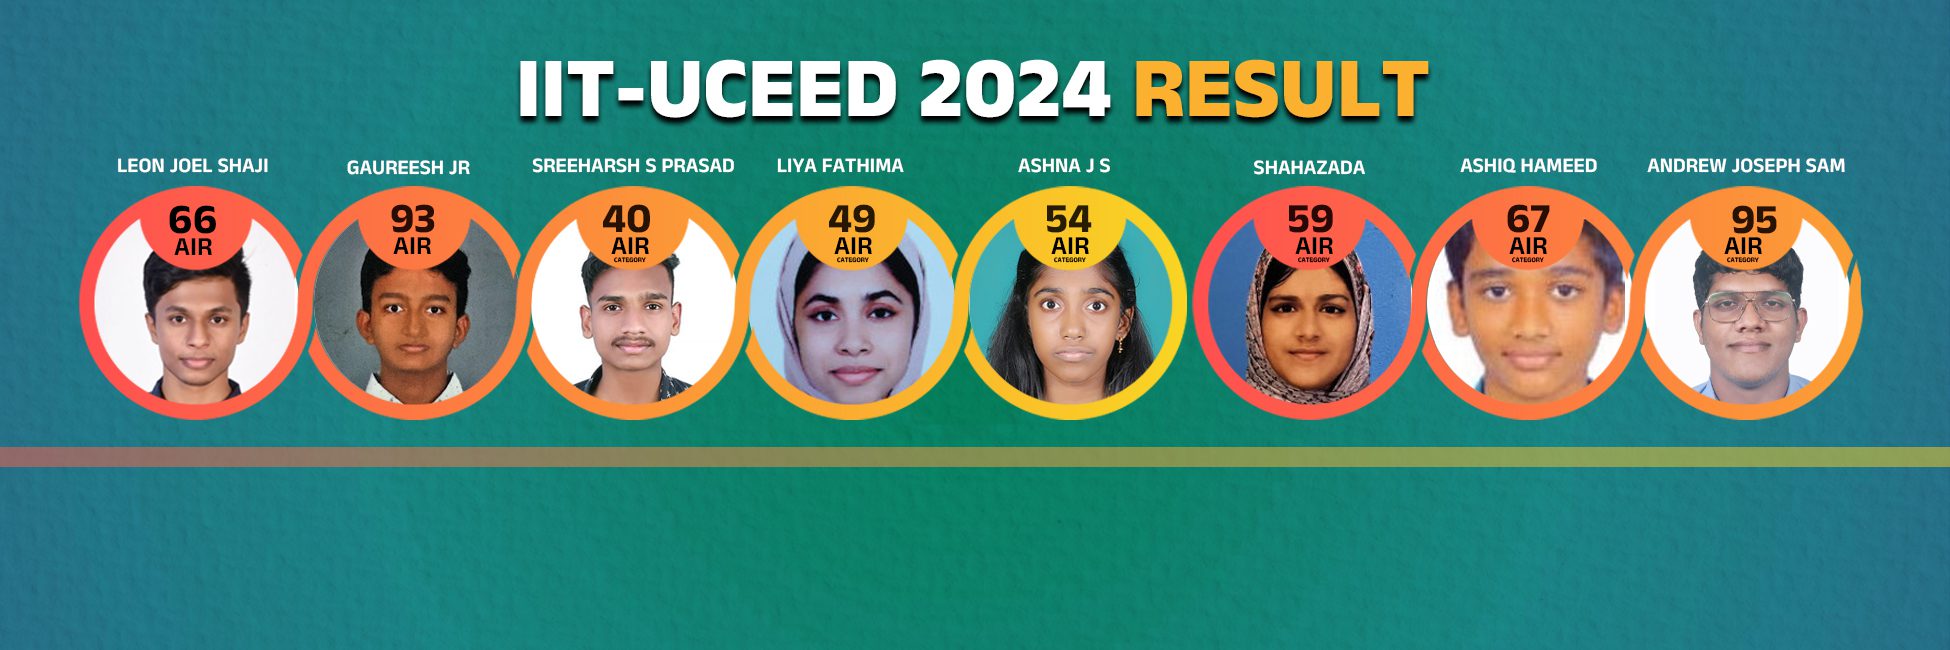 uceed-result-2024